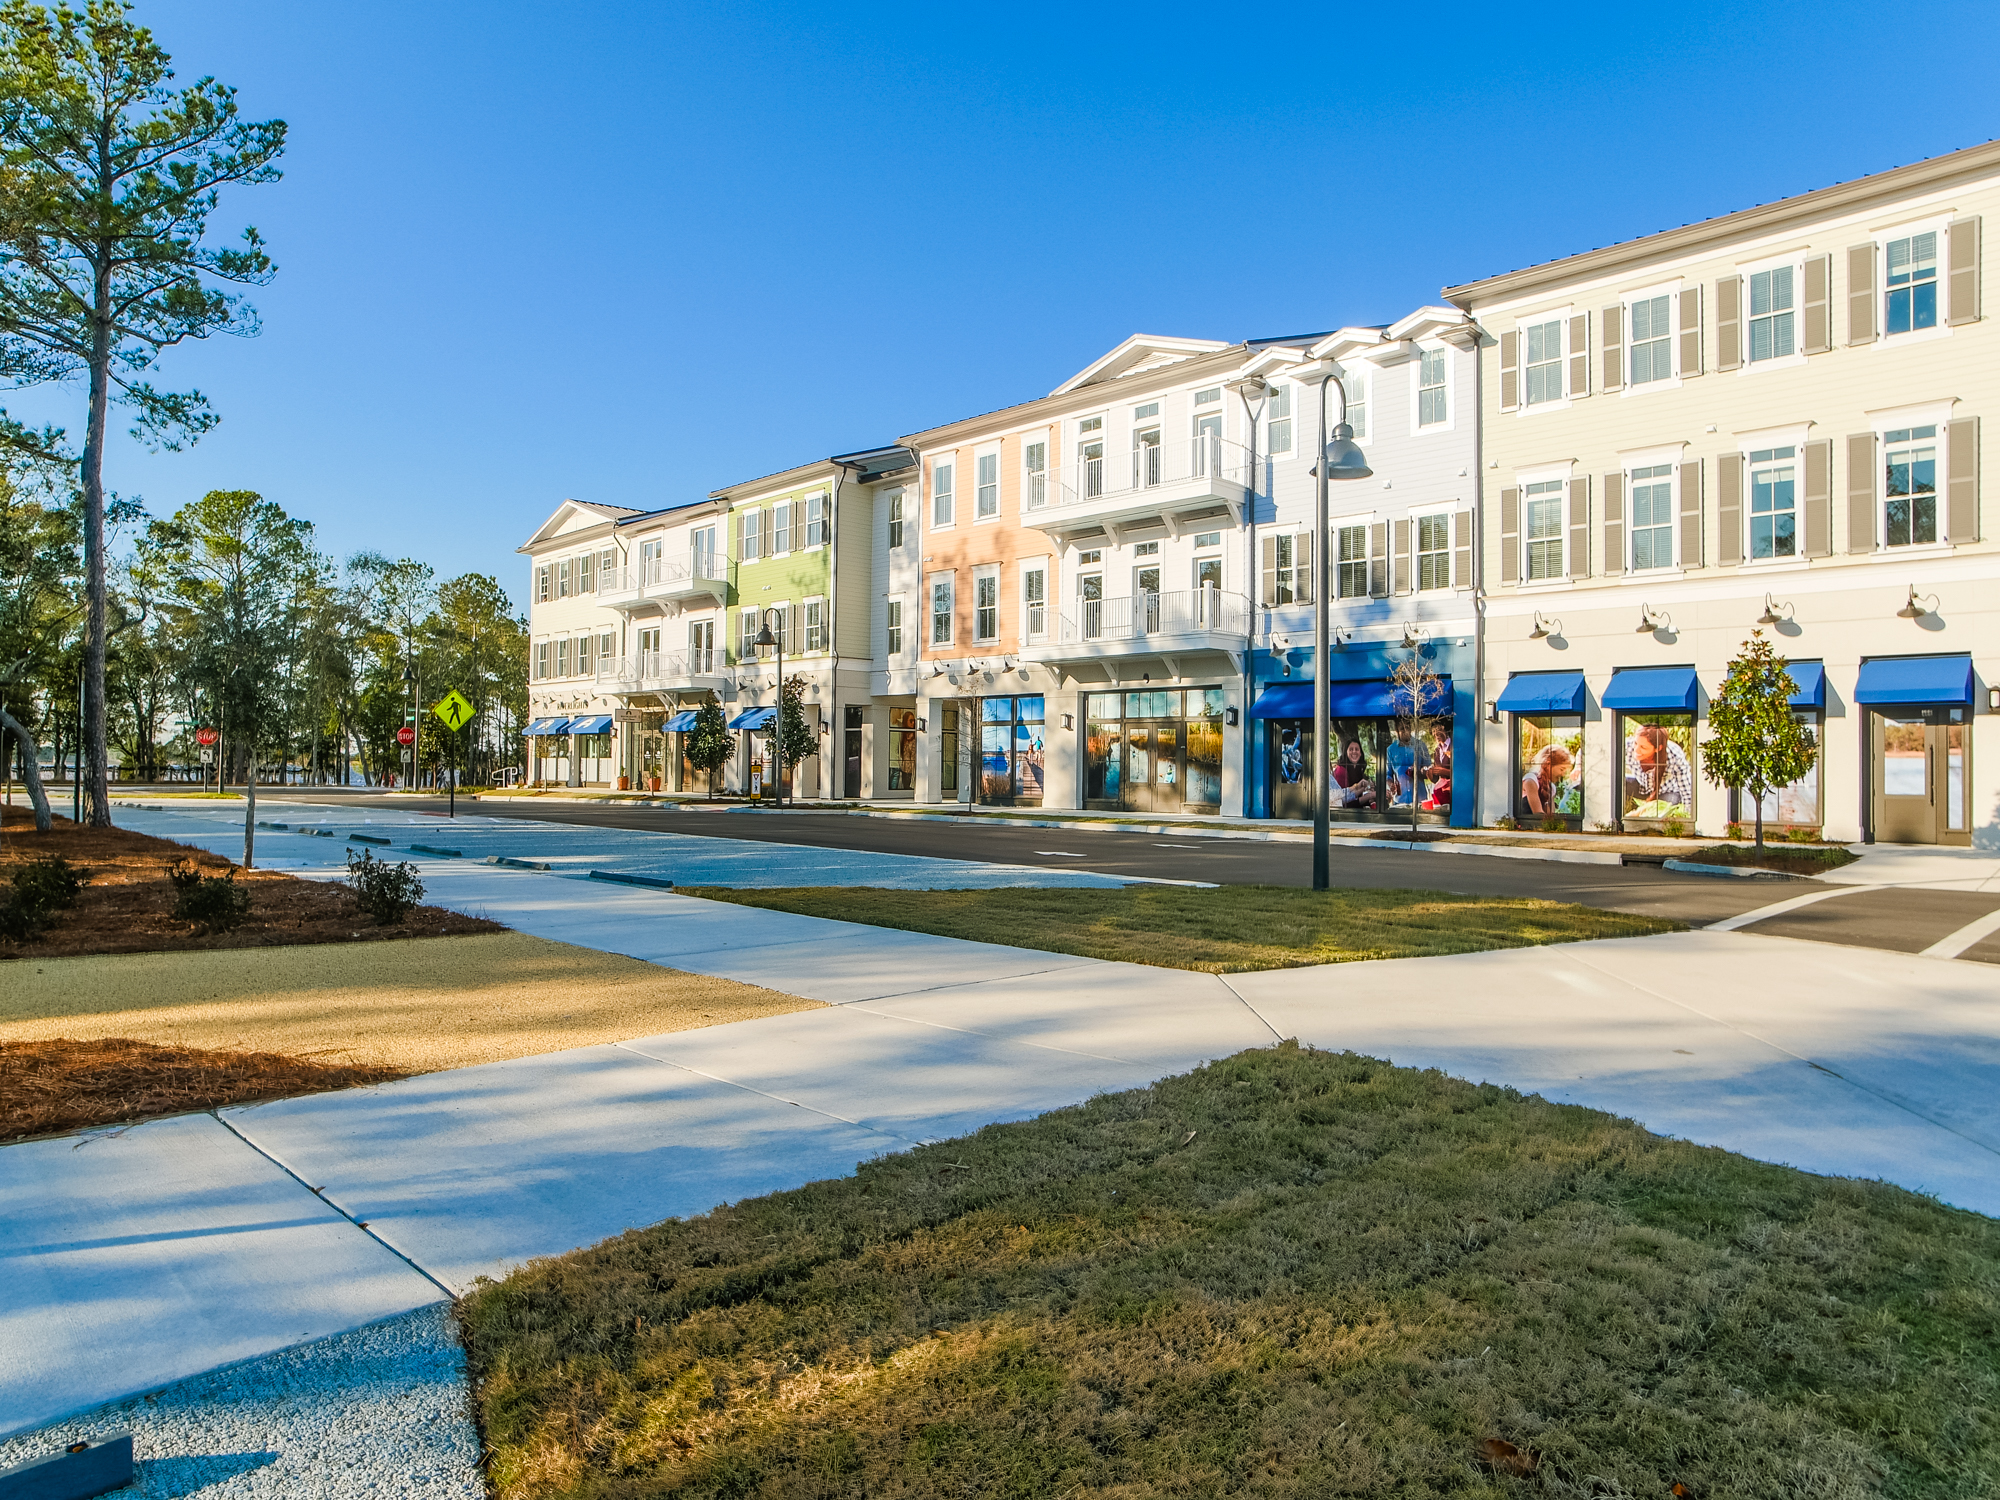 CASE STUDY: Consulting Services to Mixed-Use Community